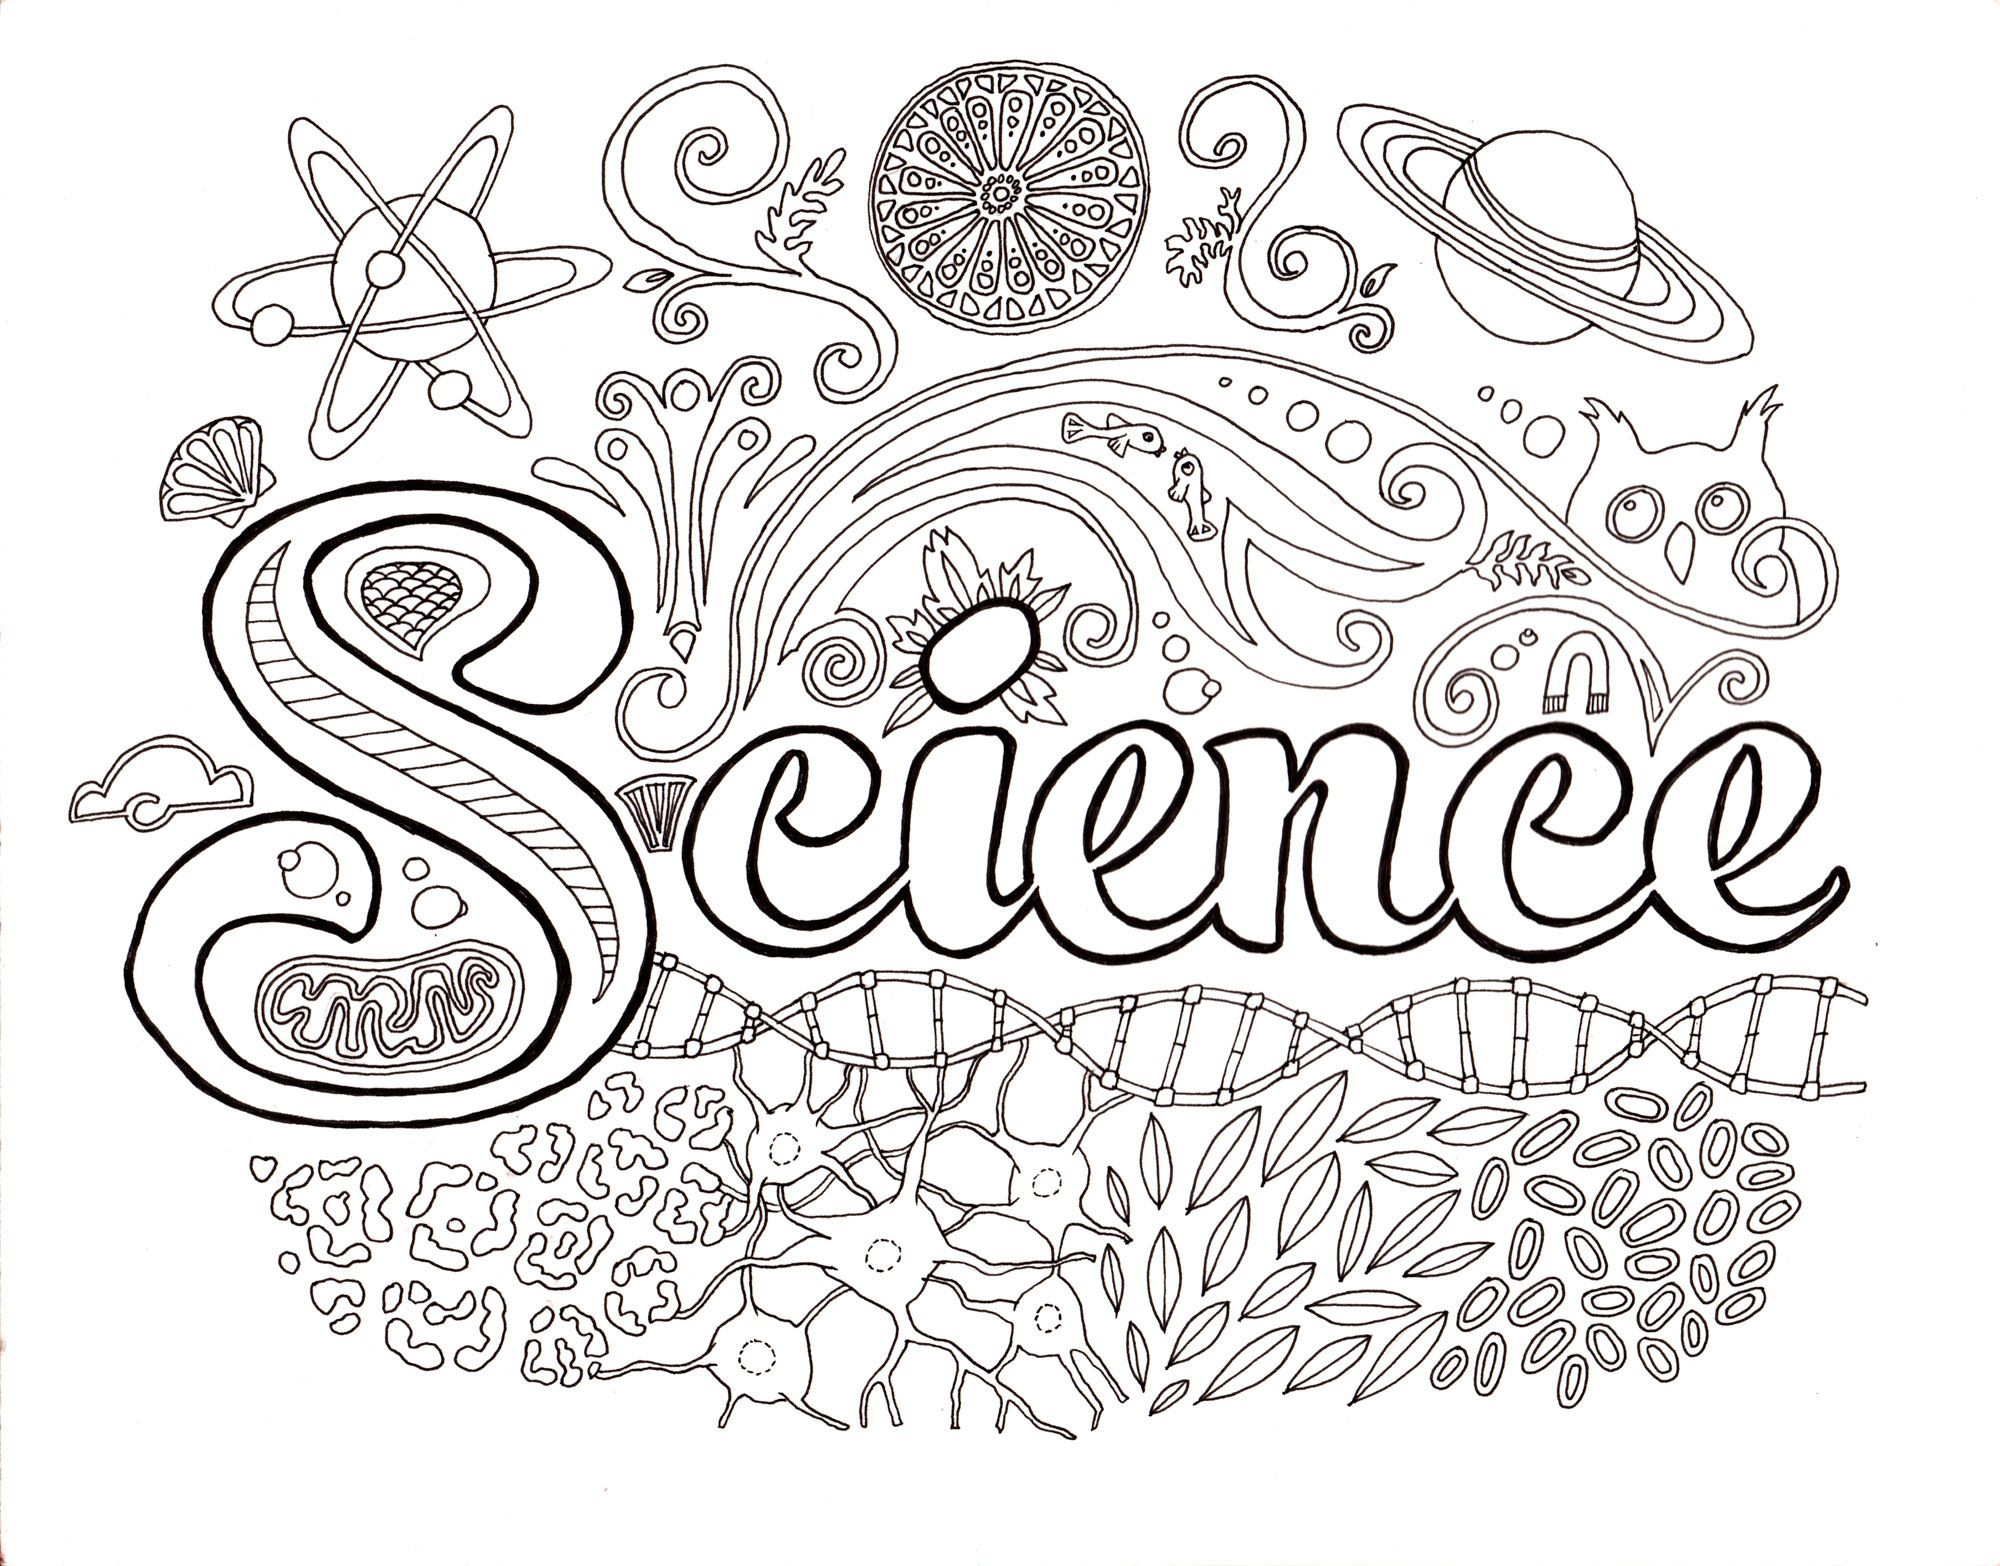  Free Science Coloring Pages 7